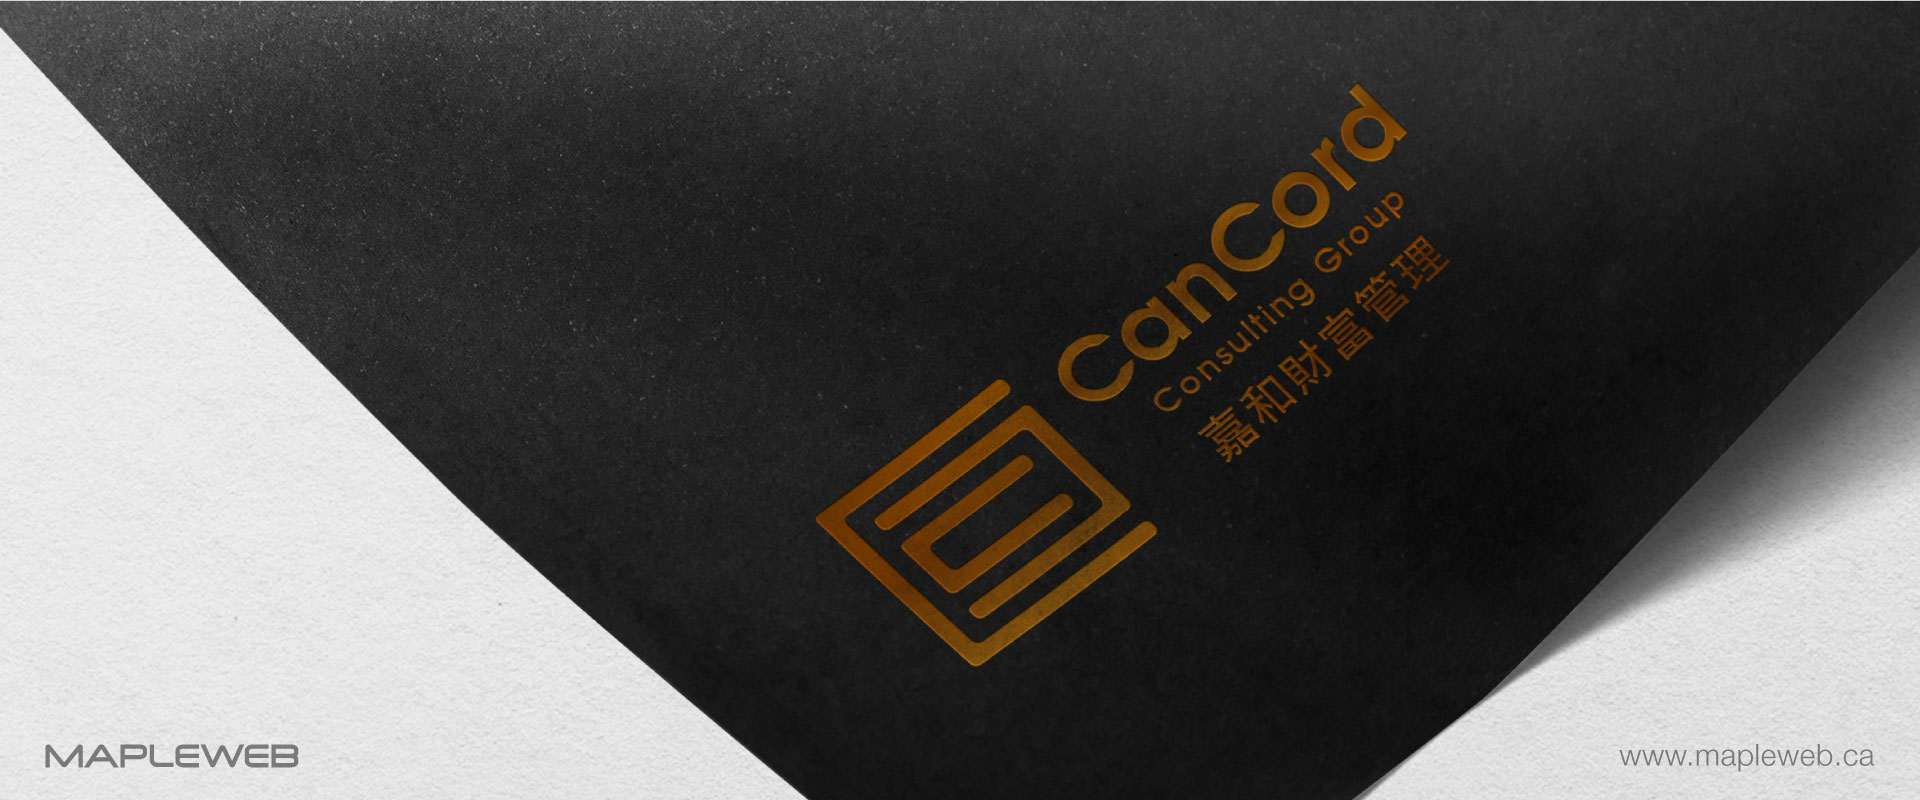 cancord-consulting-group-brand-logo-design-by-mapleweb-vancouver-canada-black-paper-mock